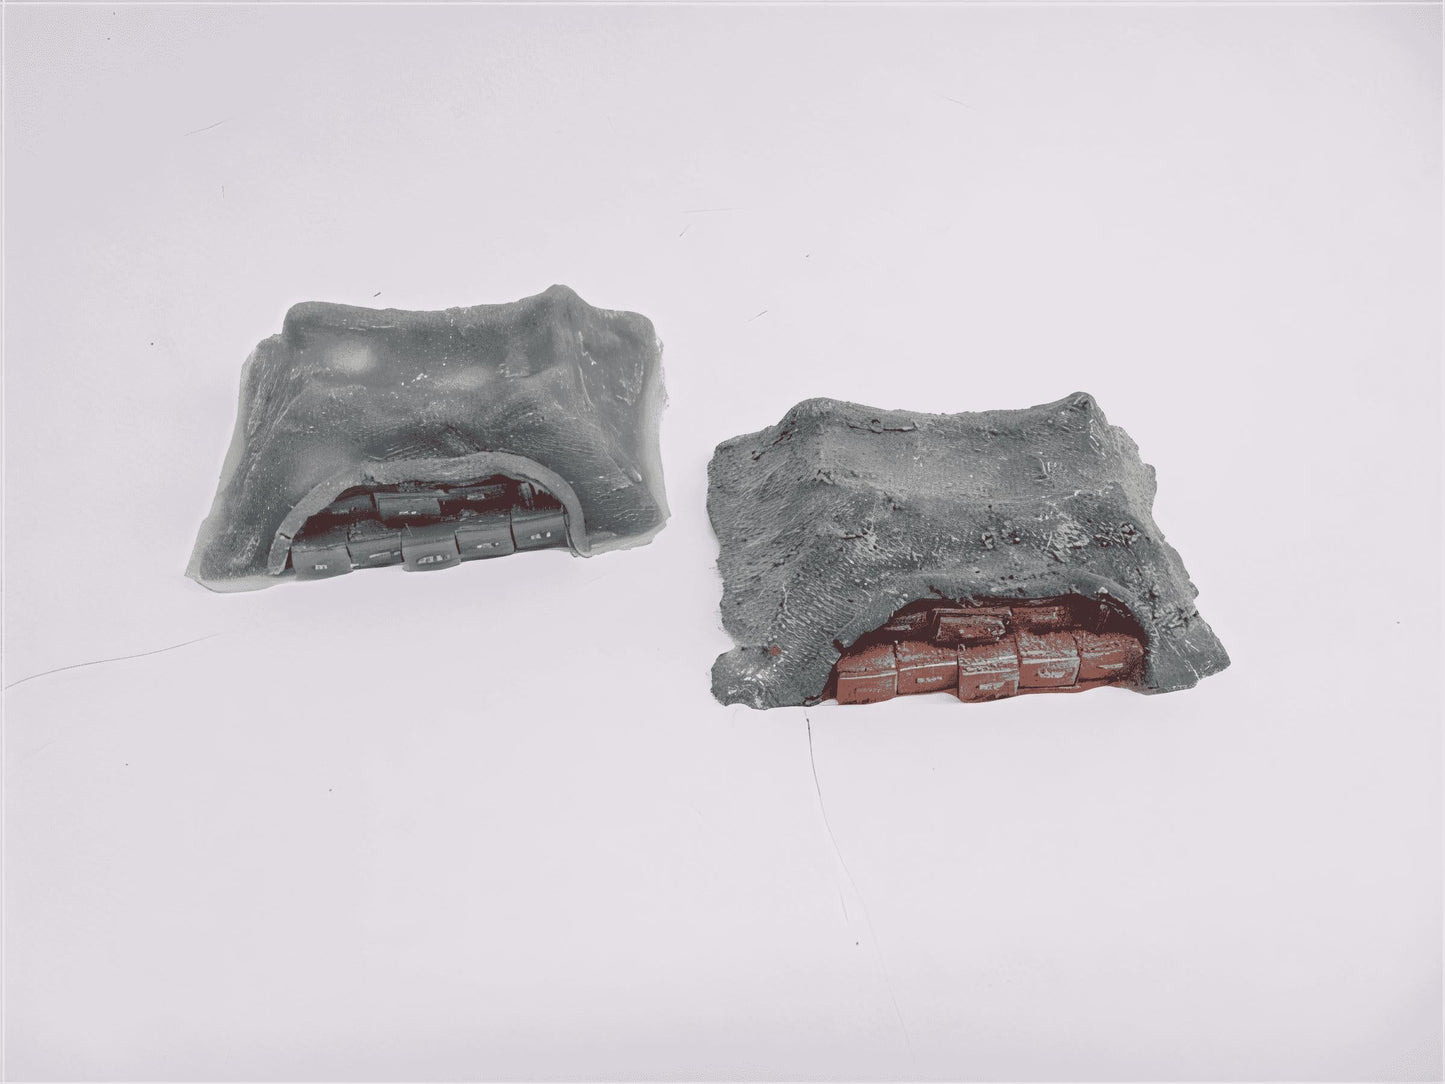 1:100 scale CAMMO NET COVERED AMMO PILE x 2